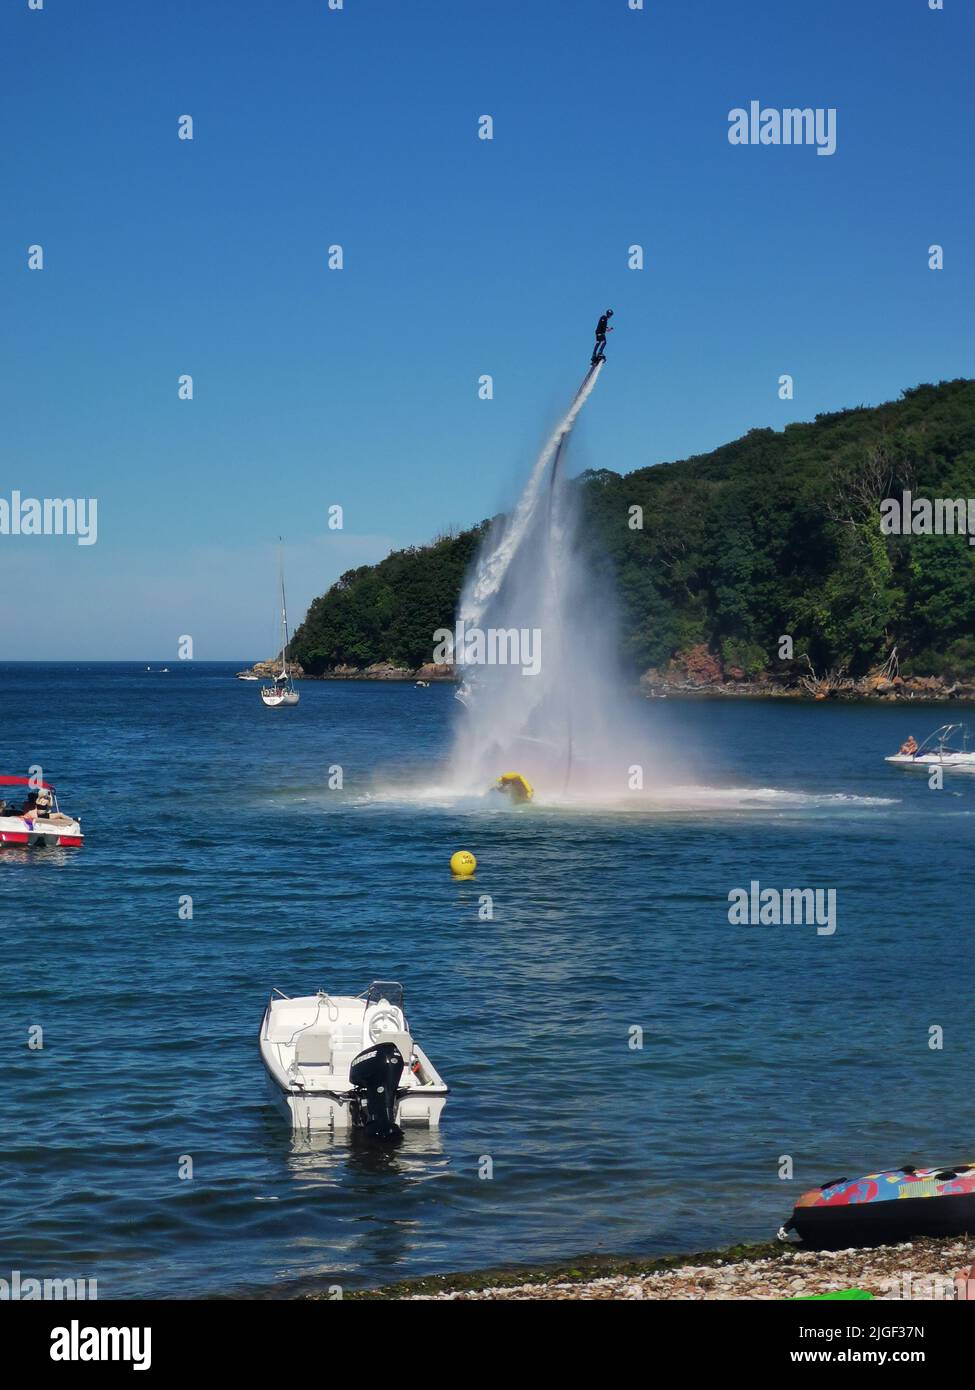 Paignton, UK. Sunday 10 July 2022. Man riding an aqua jet near Elberry Cove in Devon on a hot summer's day. Credit: Thomas Faull/Alamy Live News Stock Photo